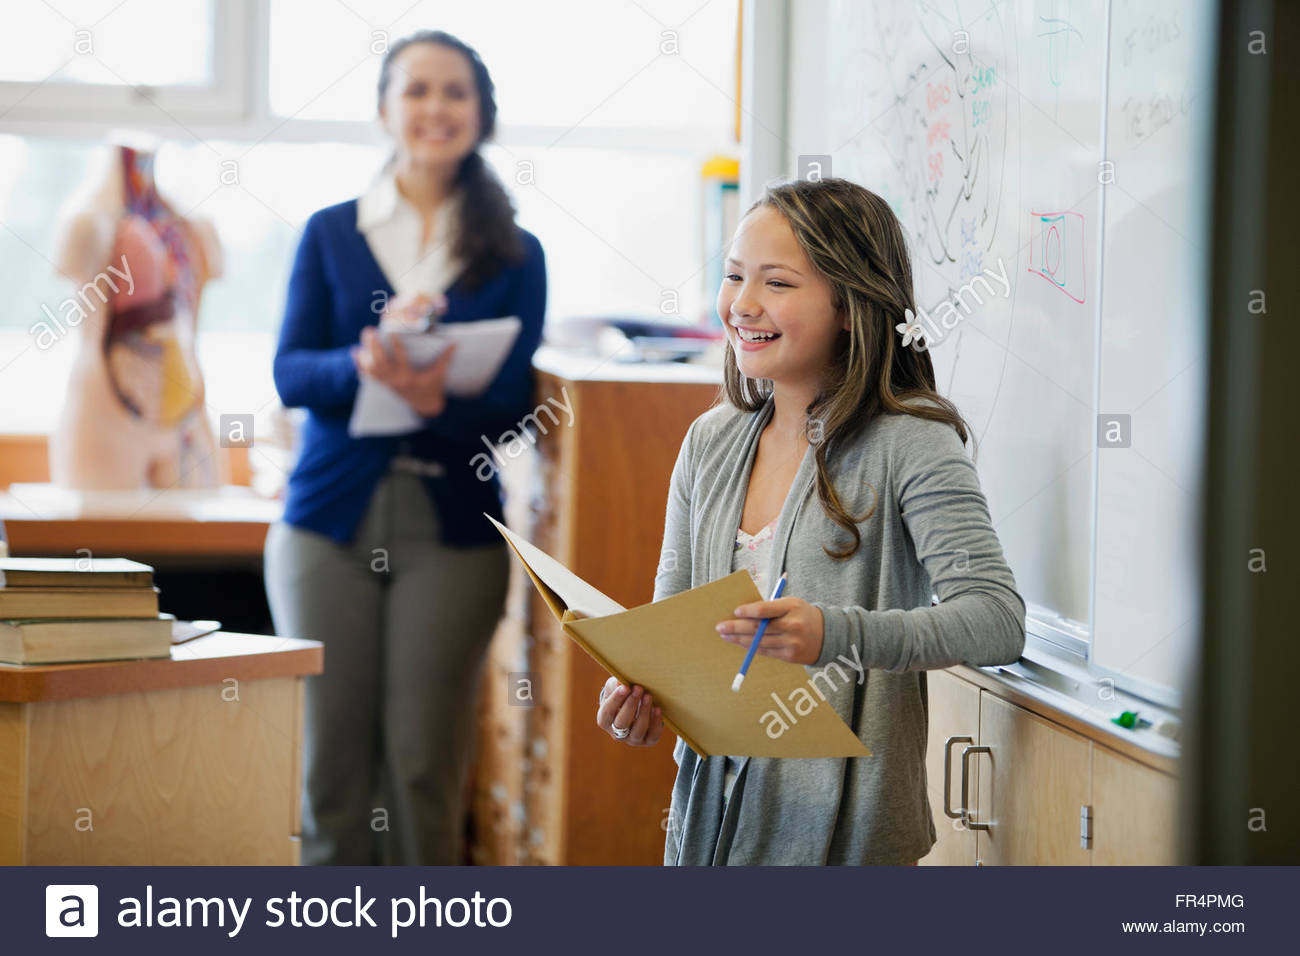 female, middle school student giving presentation Stock Photo